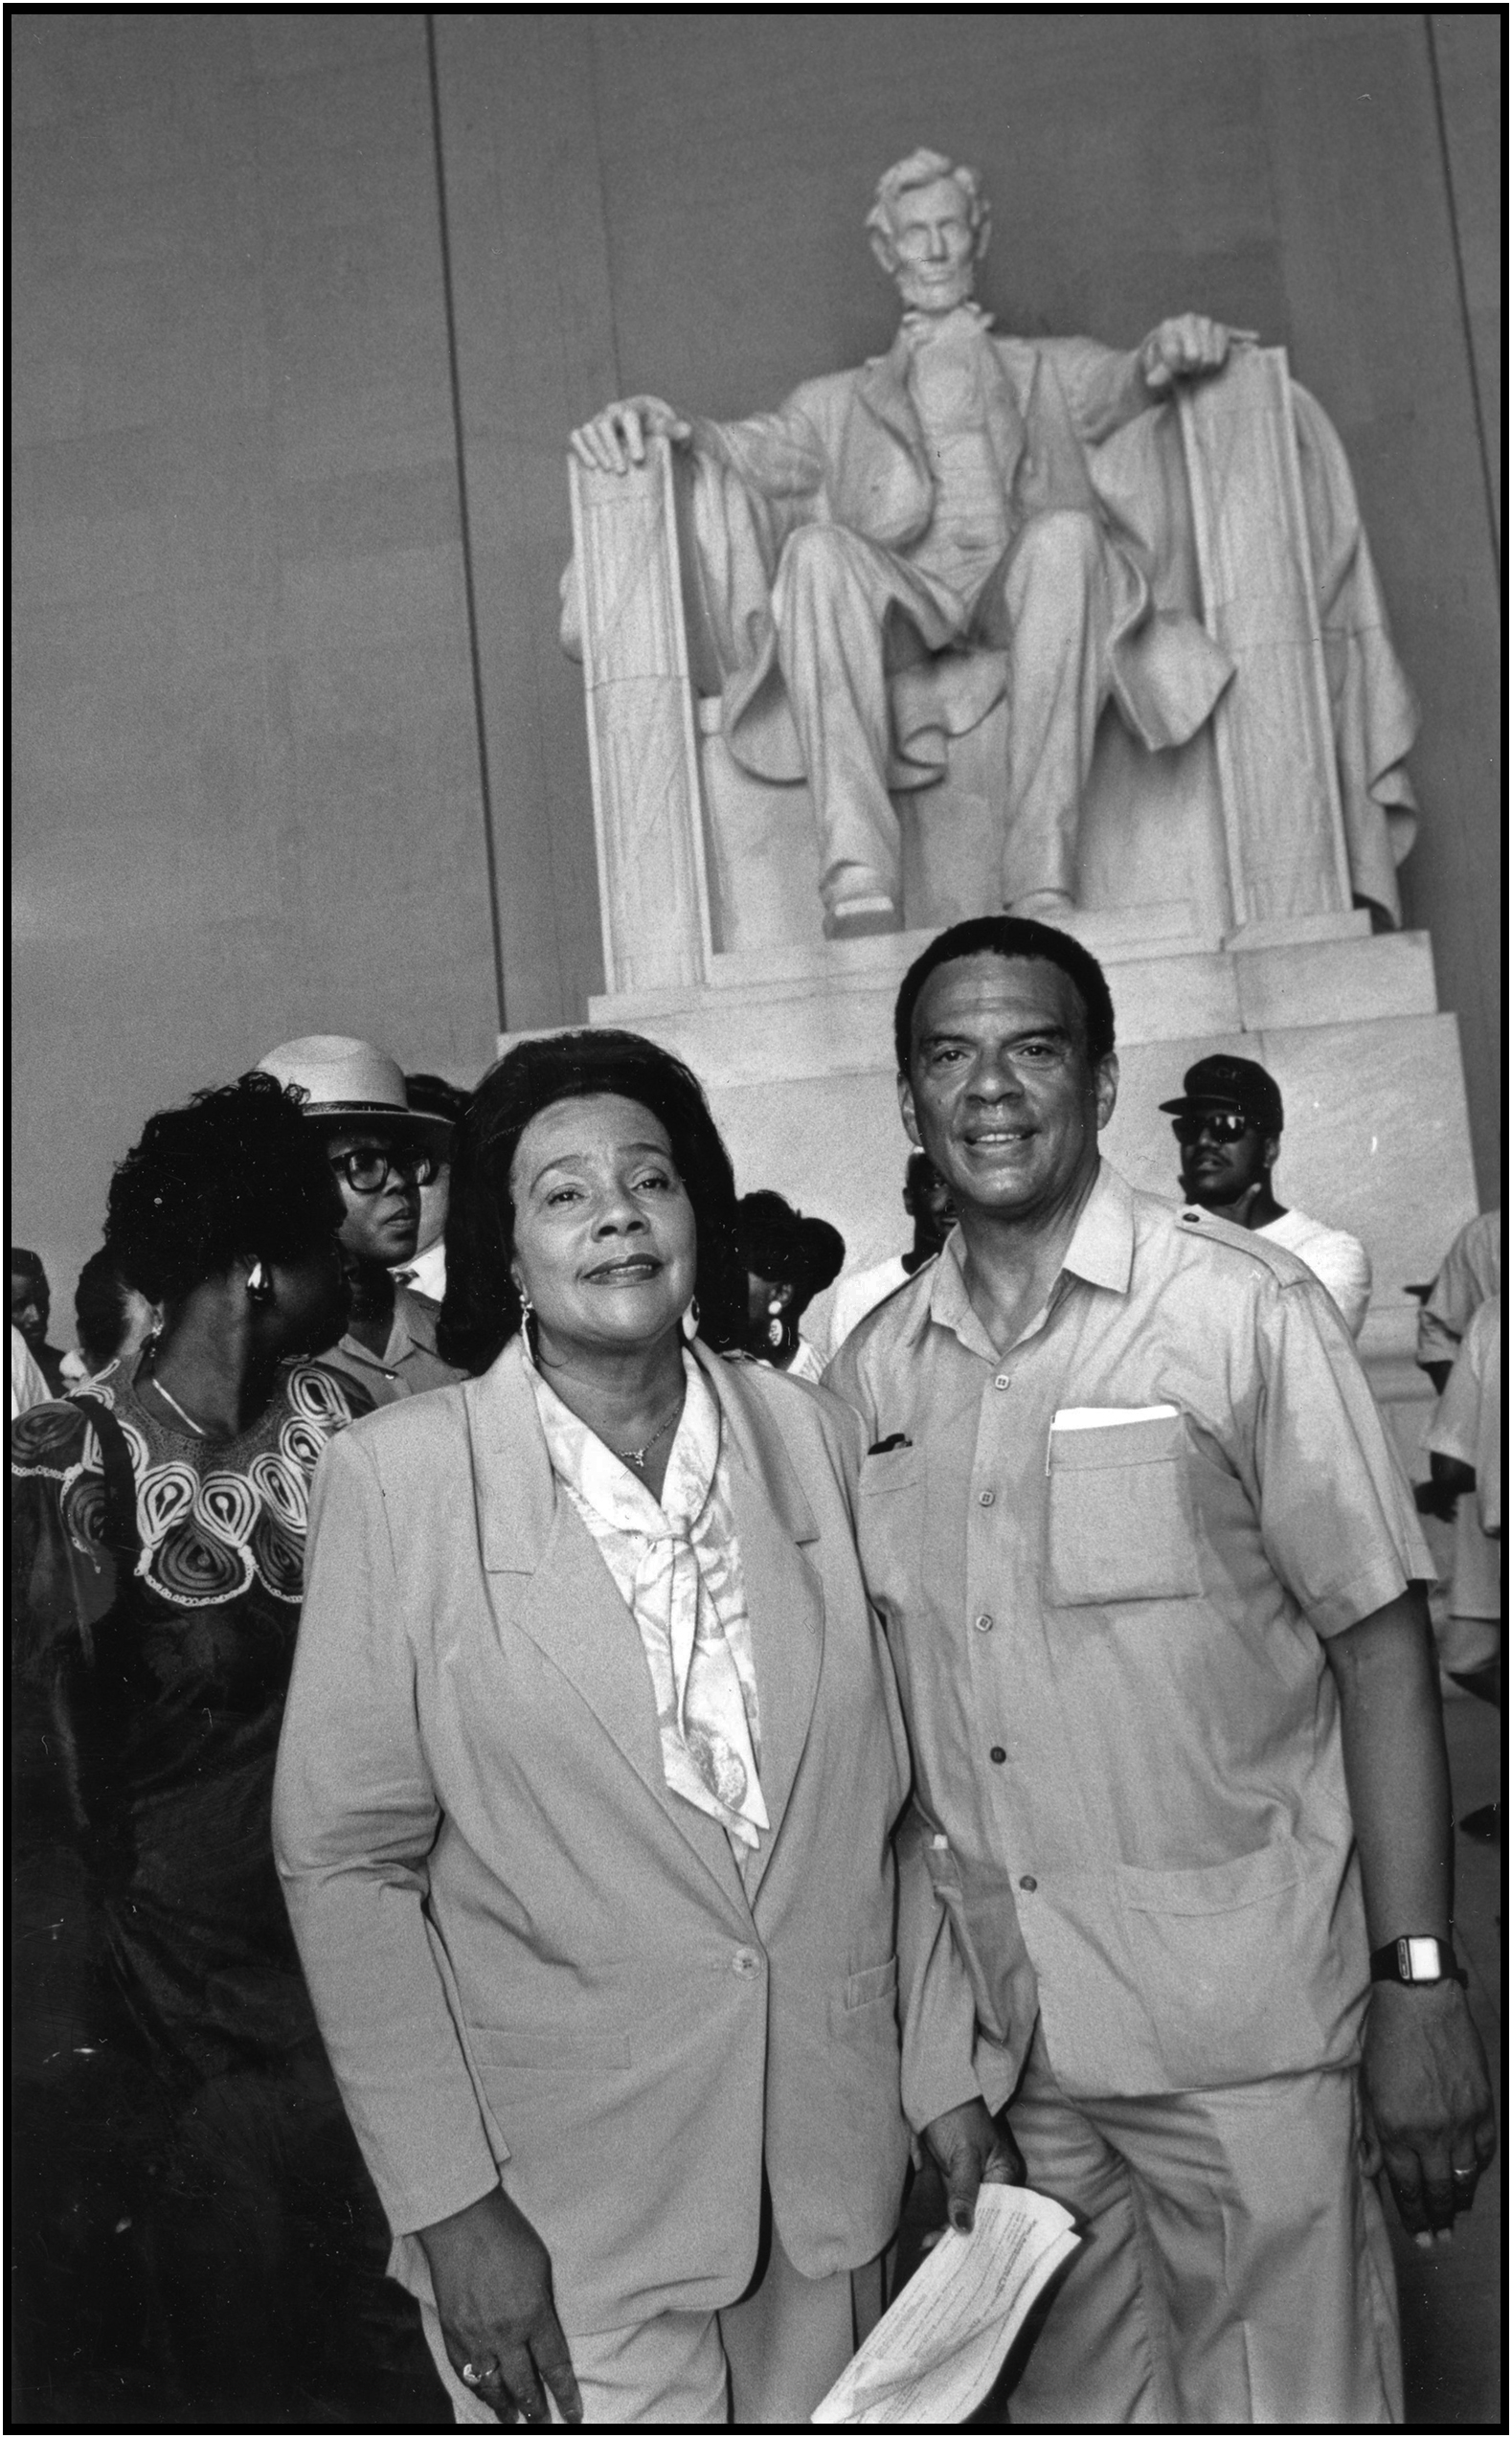   Coretta Scott King and Andrew Young, Wash., D.C., August 23, 1993.  